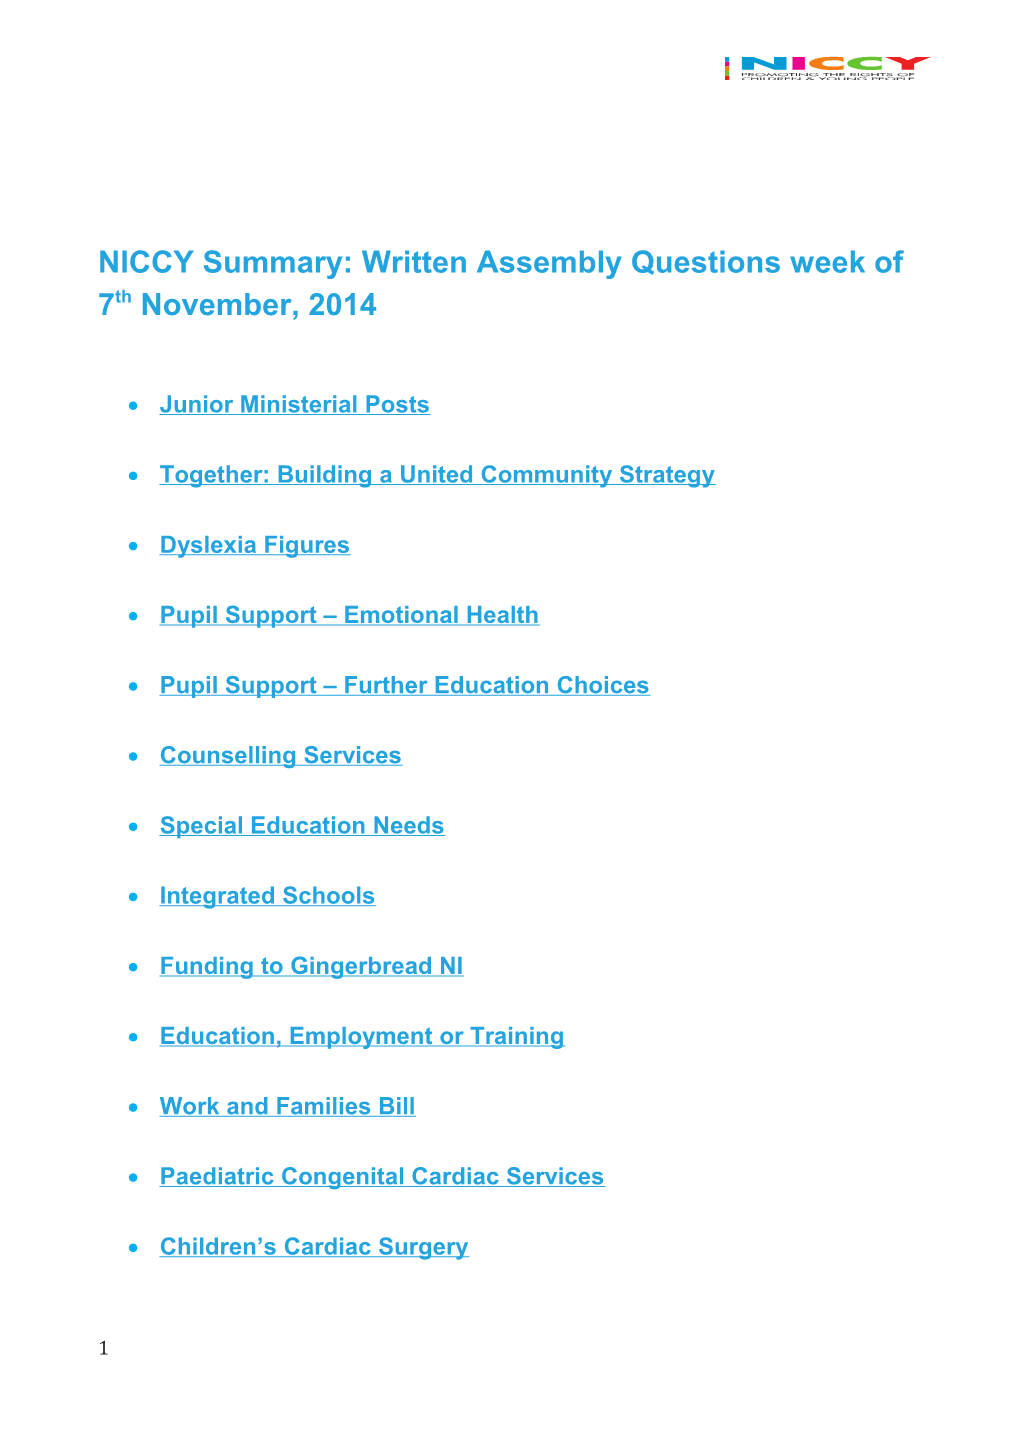 NICCY Summary: Written Assembly Questions Week of 7Th November, 2014